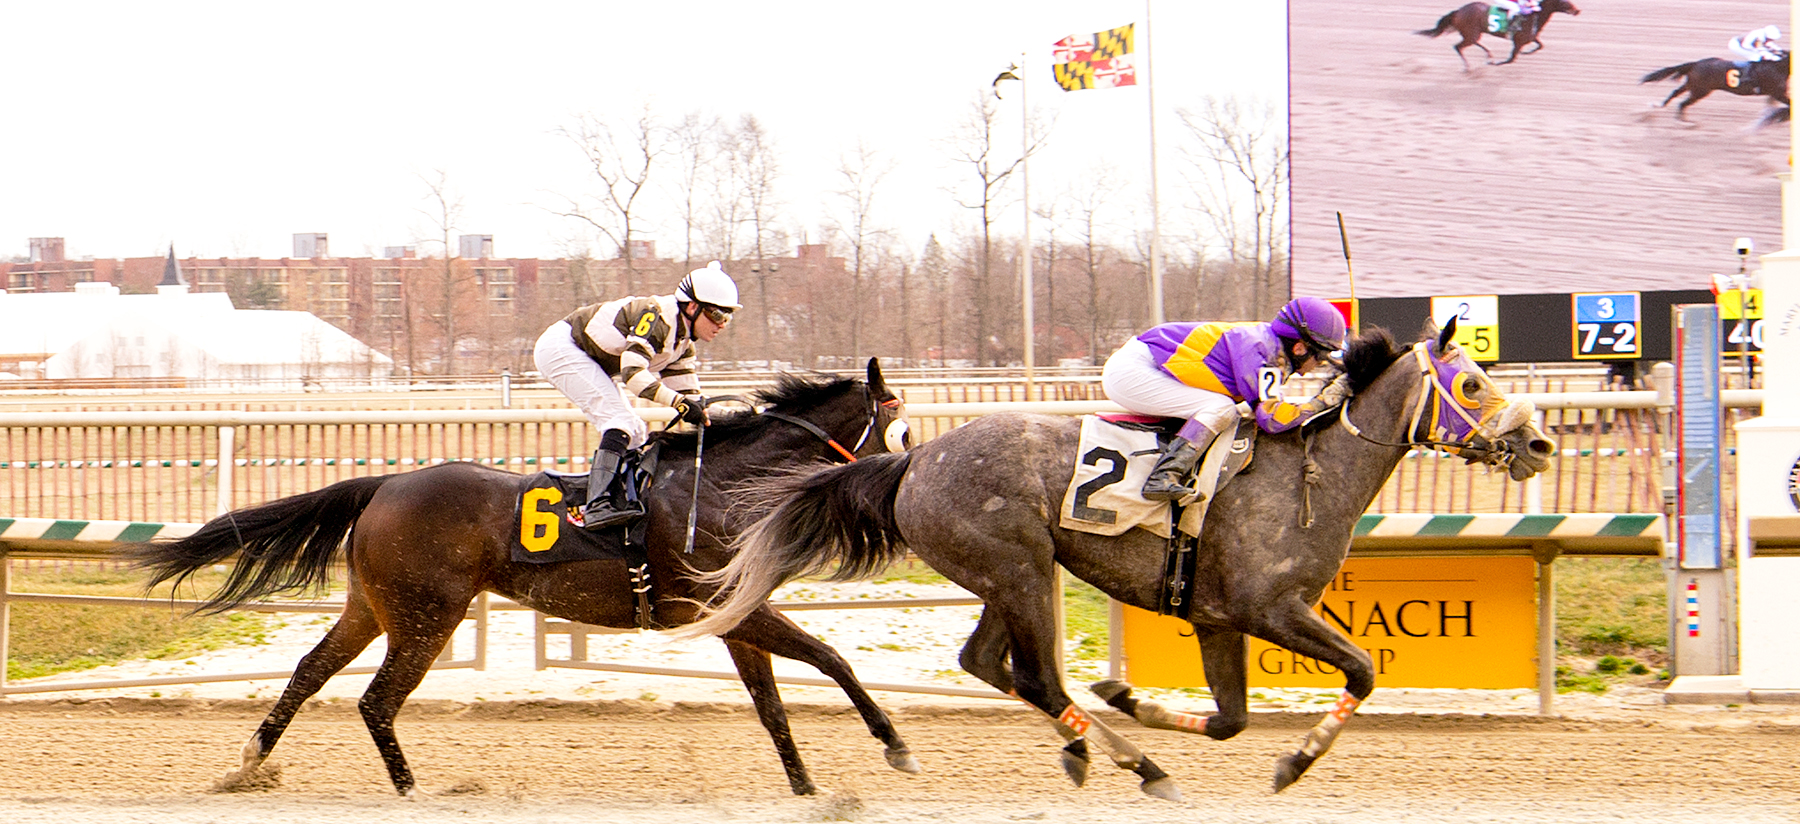 Street Miz, bred by Larry Johnson, won her second career race Feb. 25 at Laurel. Photo by Jim McCue.